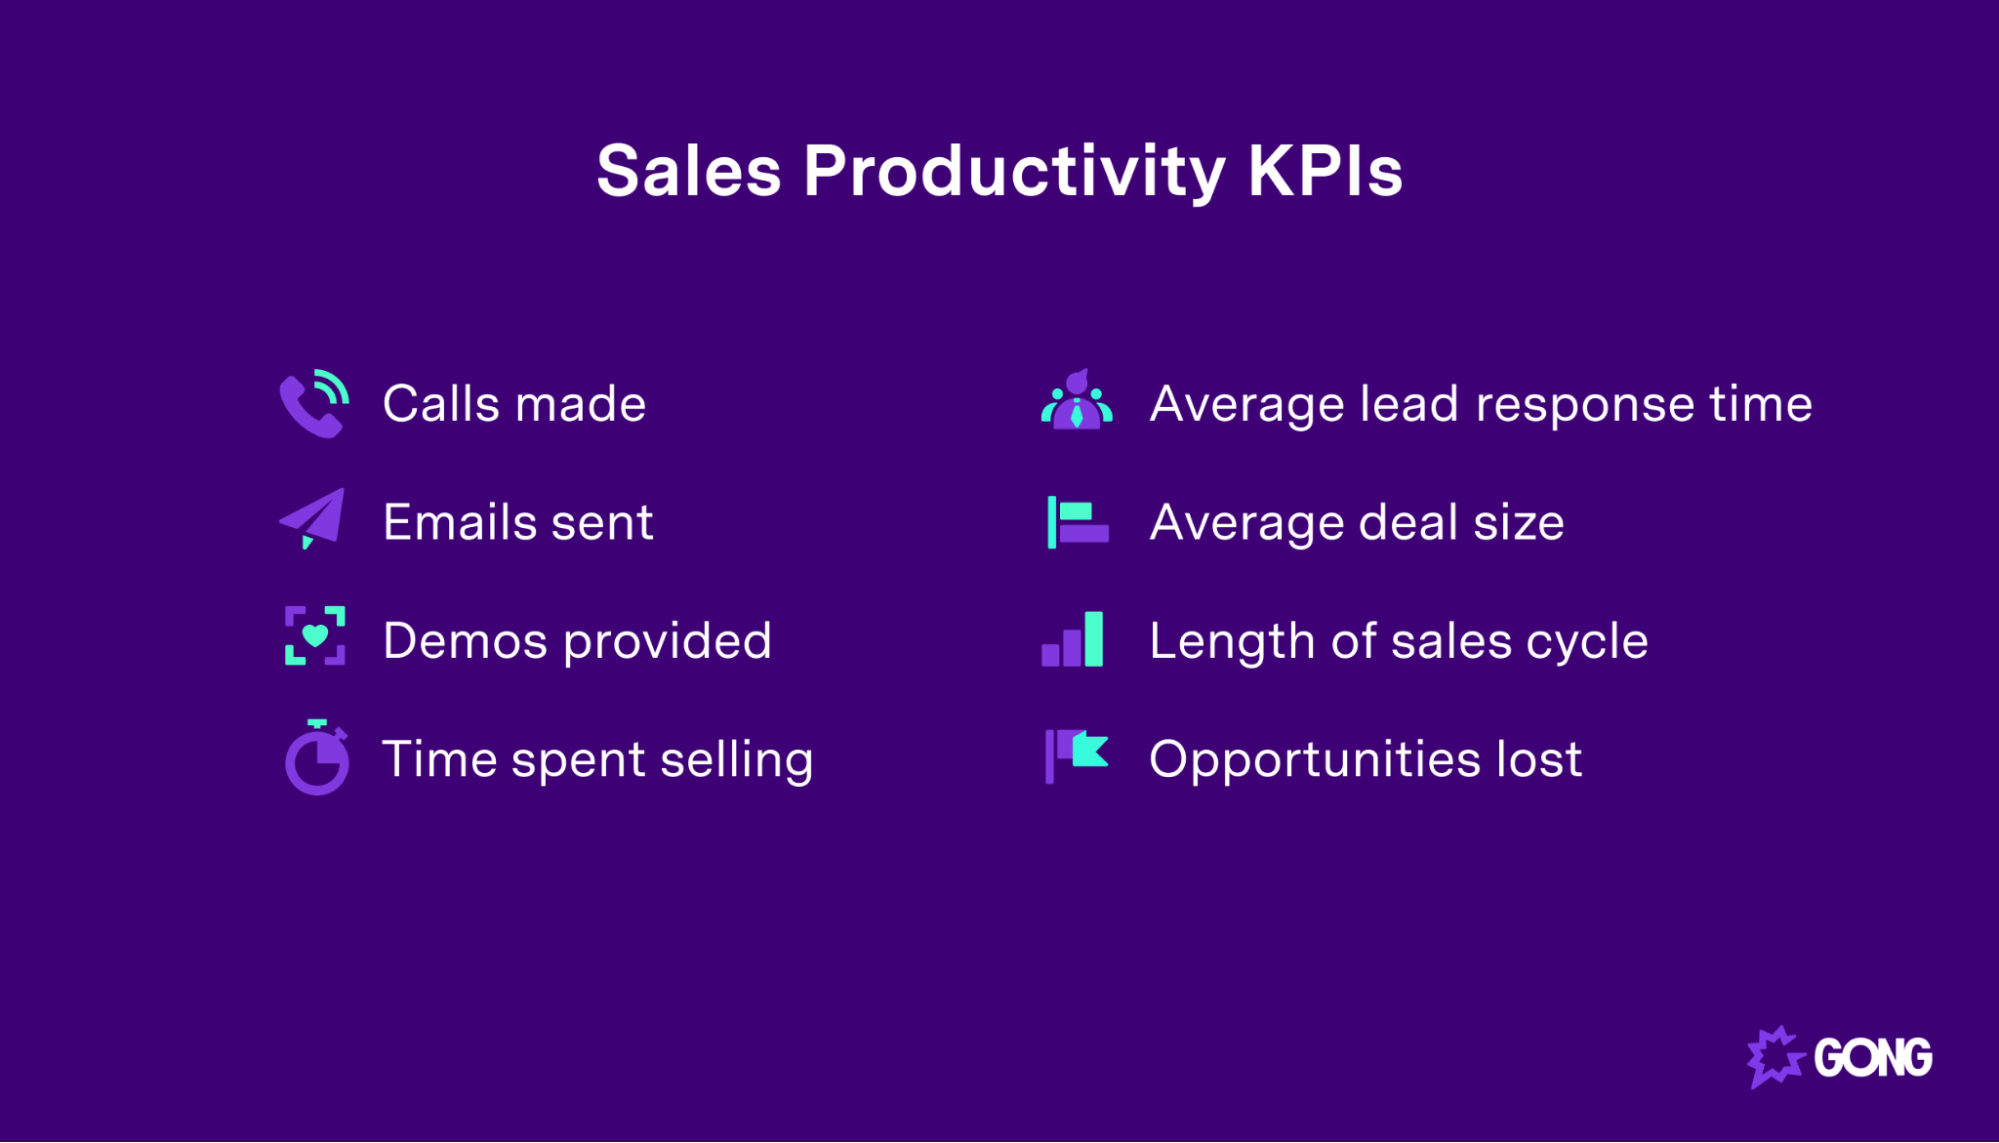 KPIs to track for sales productivity